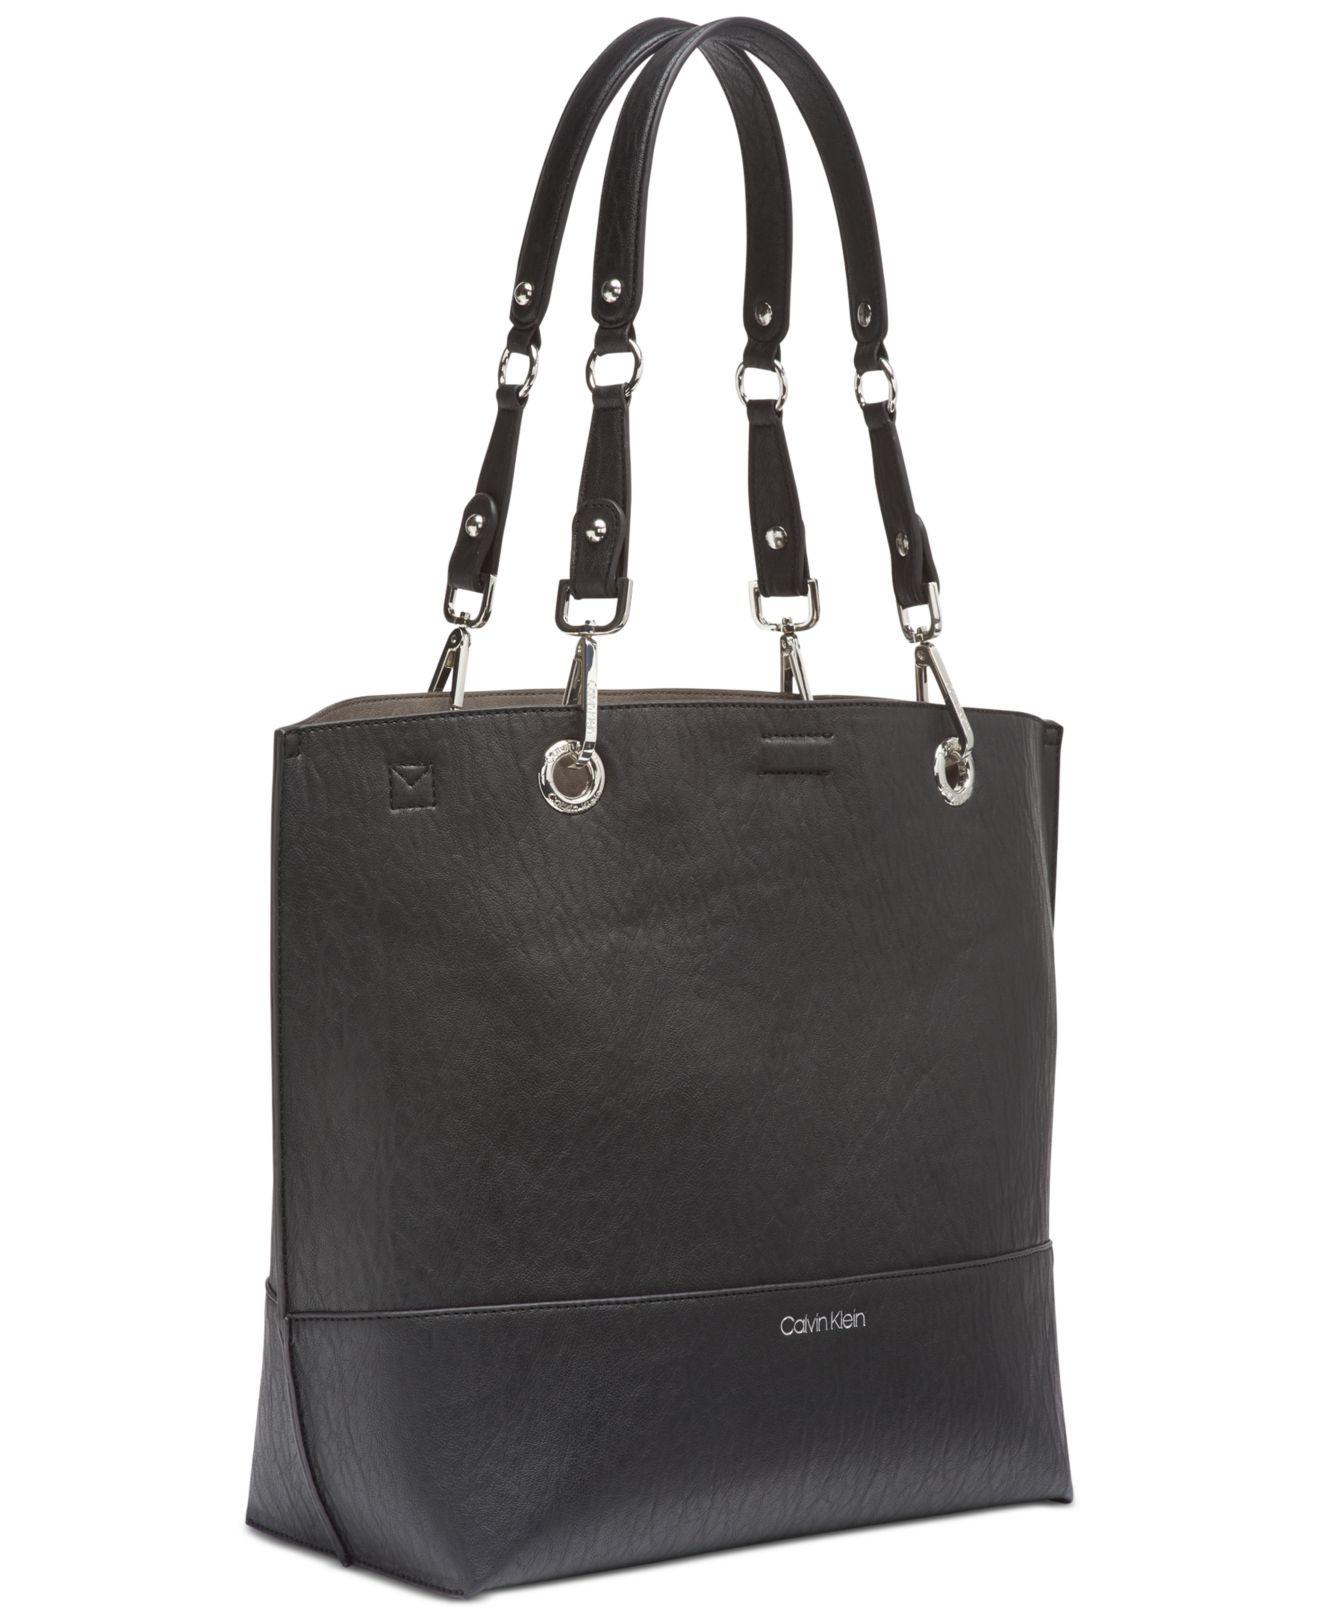 Calvin Klein Sonoma Reversible Tote With Pouch in Black/Silver (Black) |  Lyst